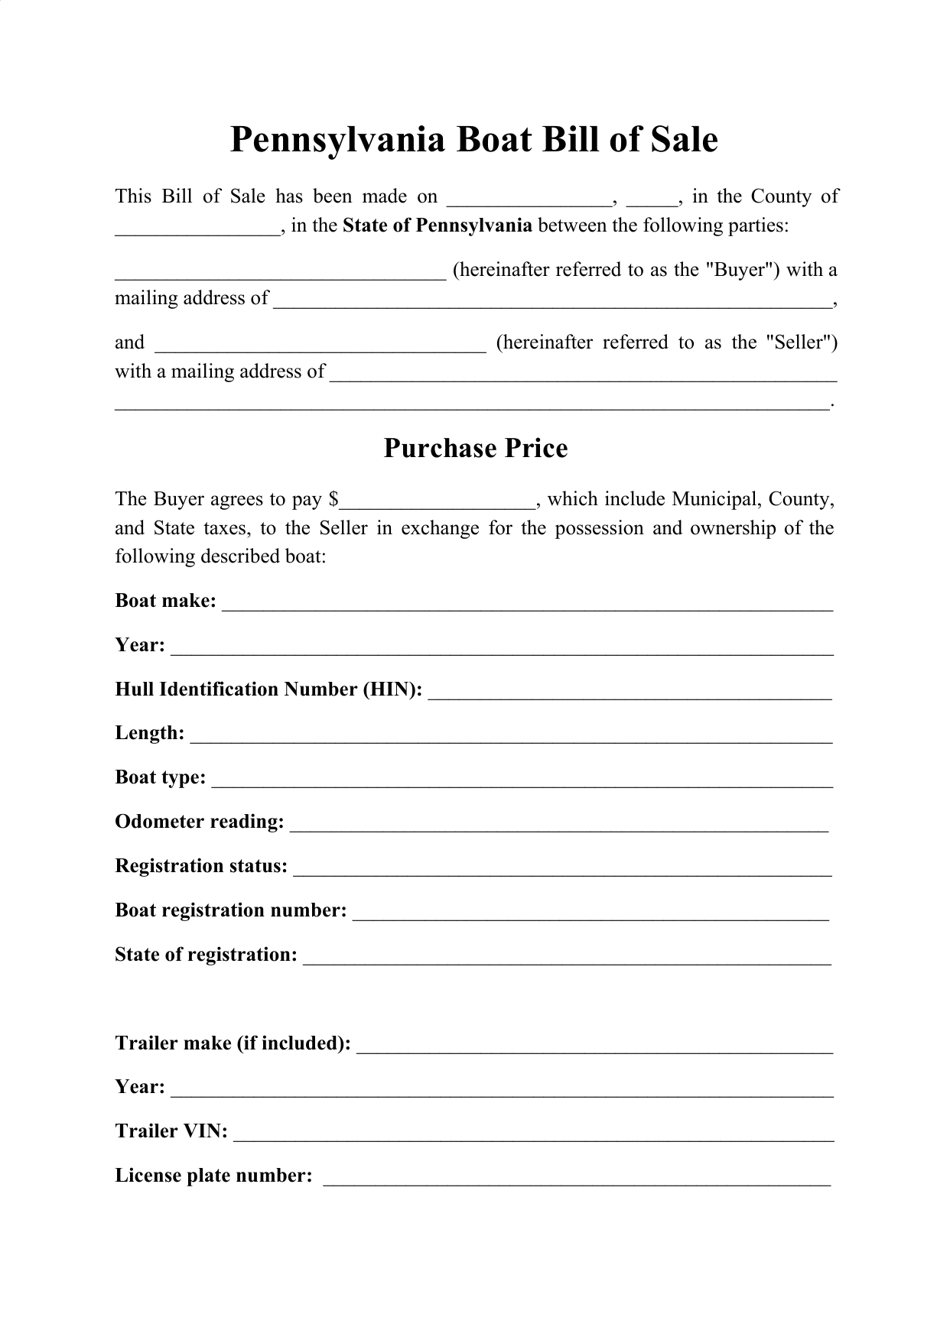 pennsylvania-boat-bill-of-sale-form-fill-out-sign-online-and